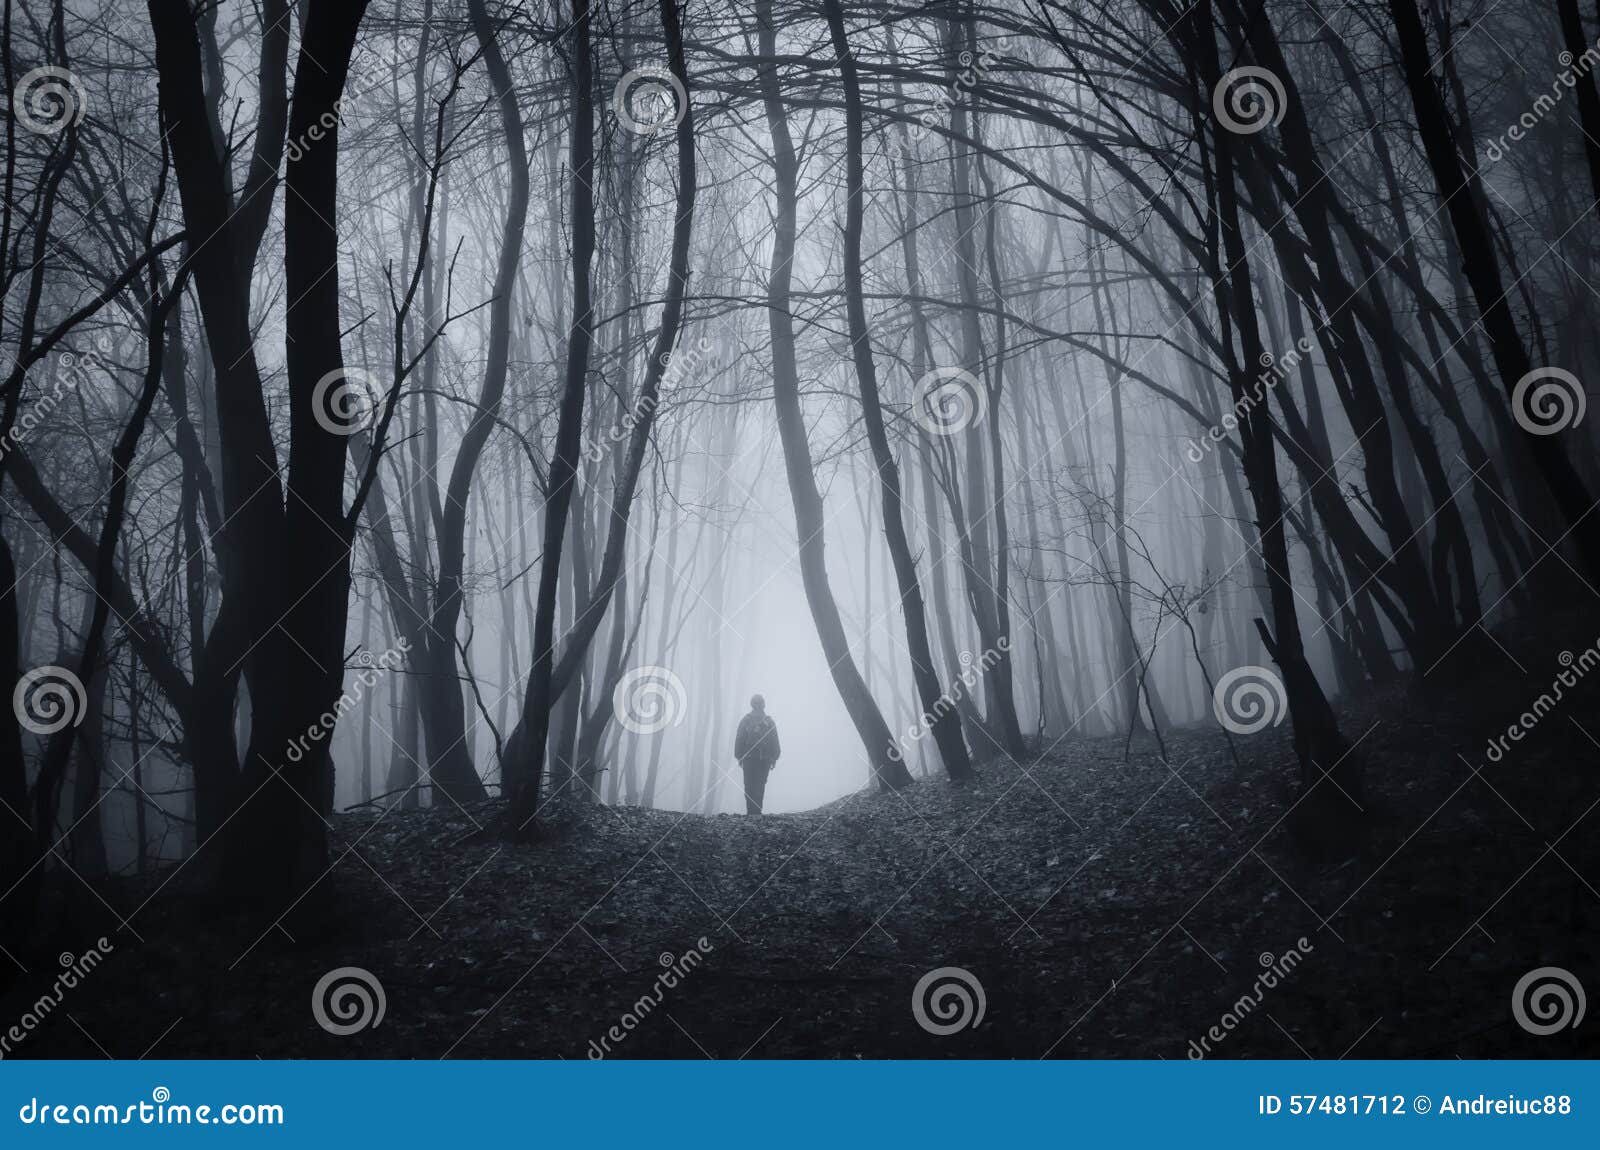 Man Walking In Halloween Mysterious Forest With Fog Stock Photo Image Of Gloomy Fantasy